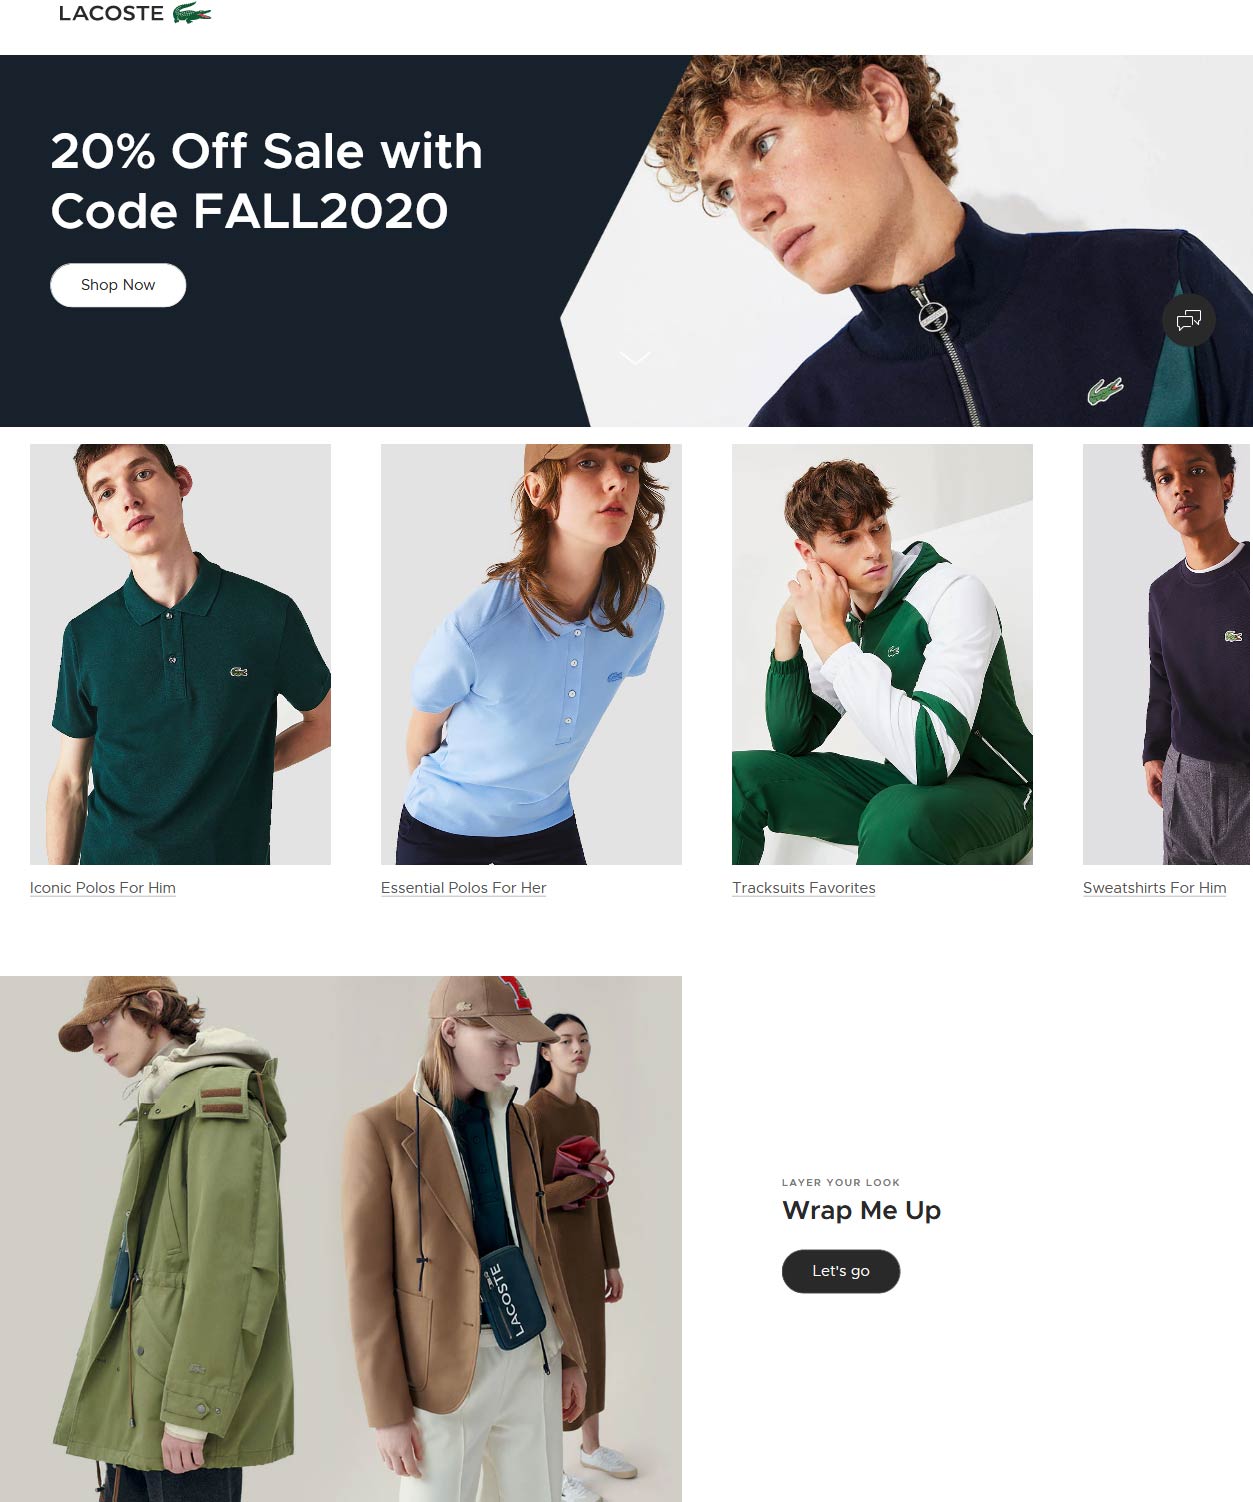 LACOSTE stores Coupon  20% off sale items at LACOSTE via promo code FALL2020 #lacoste 